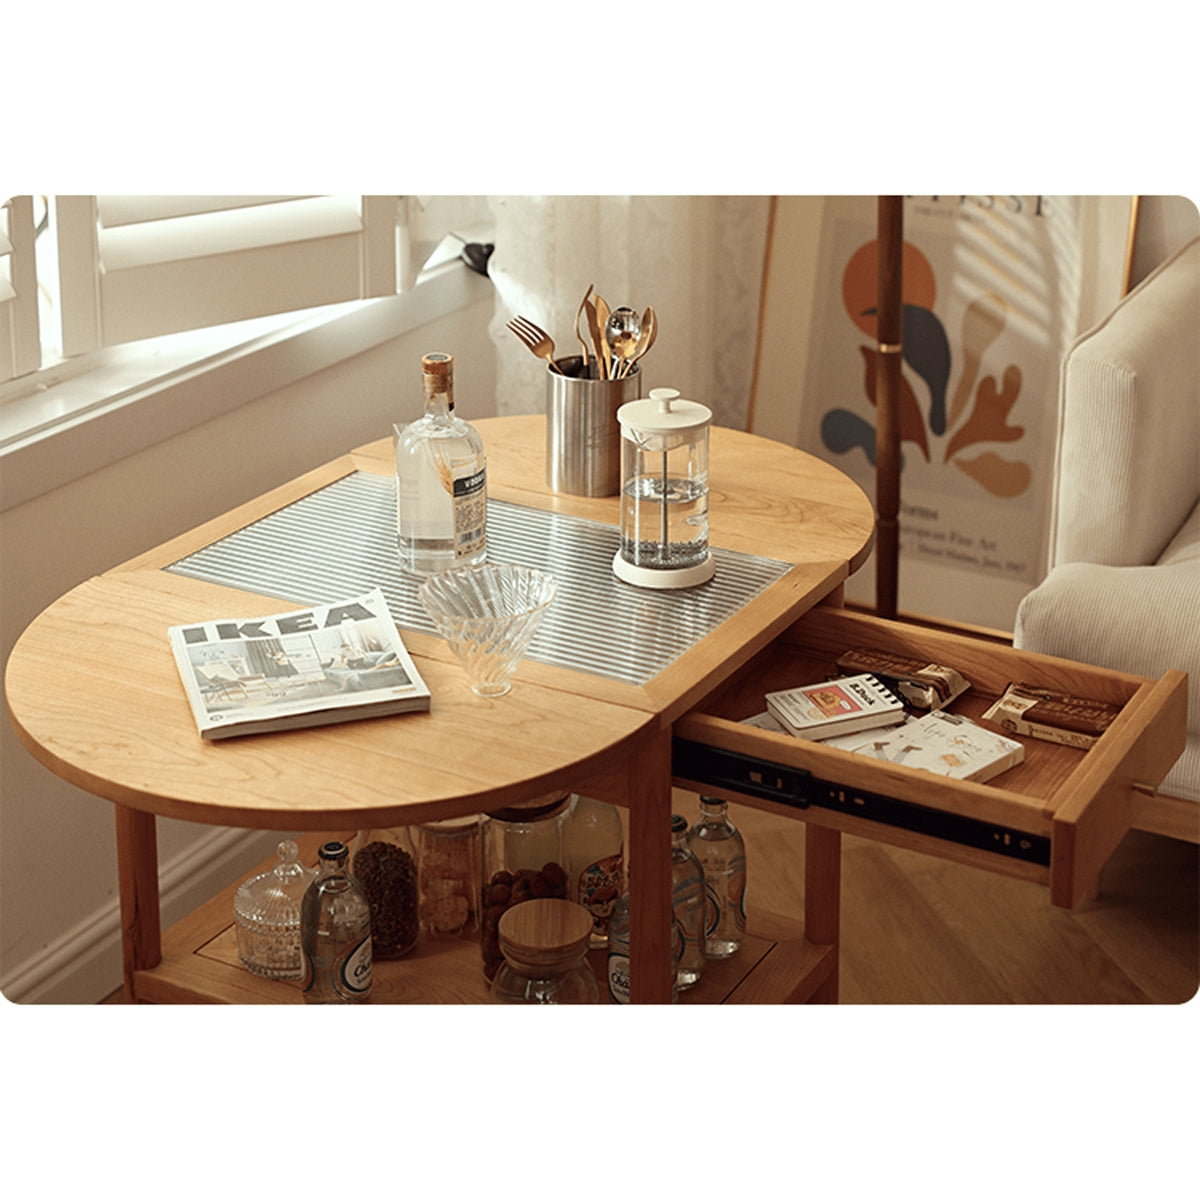 Stylish Light Oak Wood Tea Table with Metal and Nylon Accents - Natural Brown Finish fyg-666